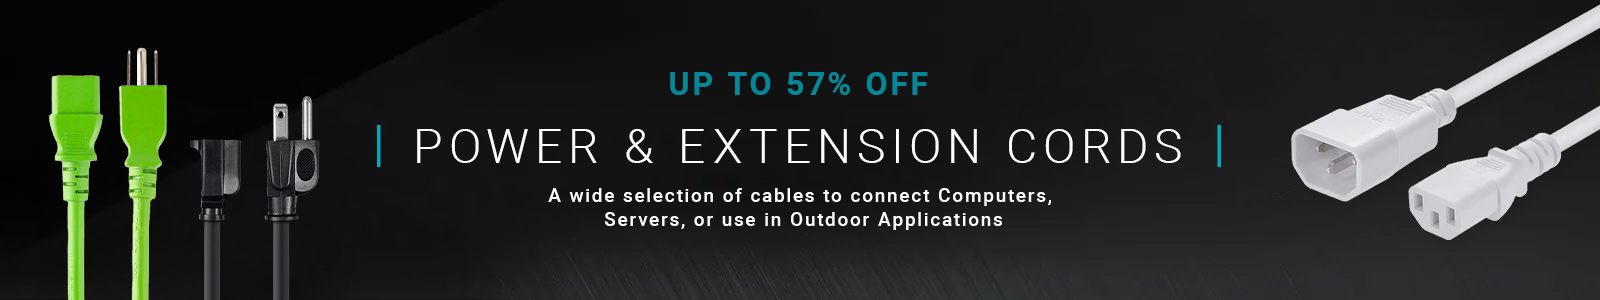 Up to 57% off
Power & Extension Cords
A wide selection of cables to connect Computers, Servers, or use in Outdoor Applications
Shop Now